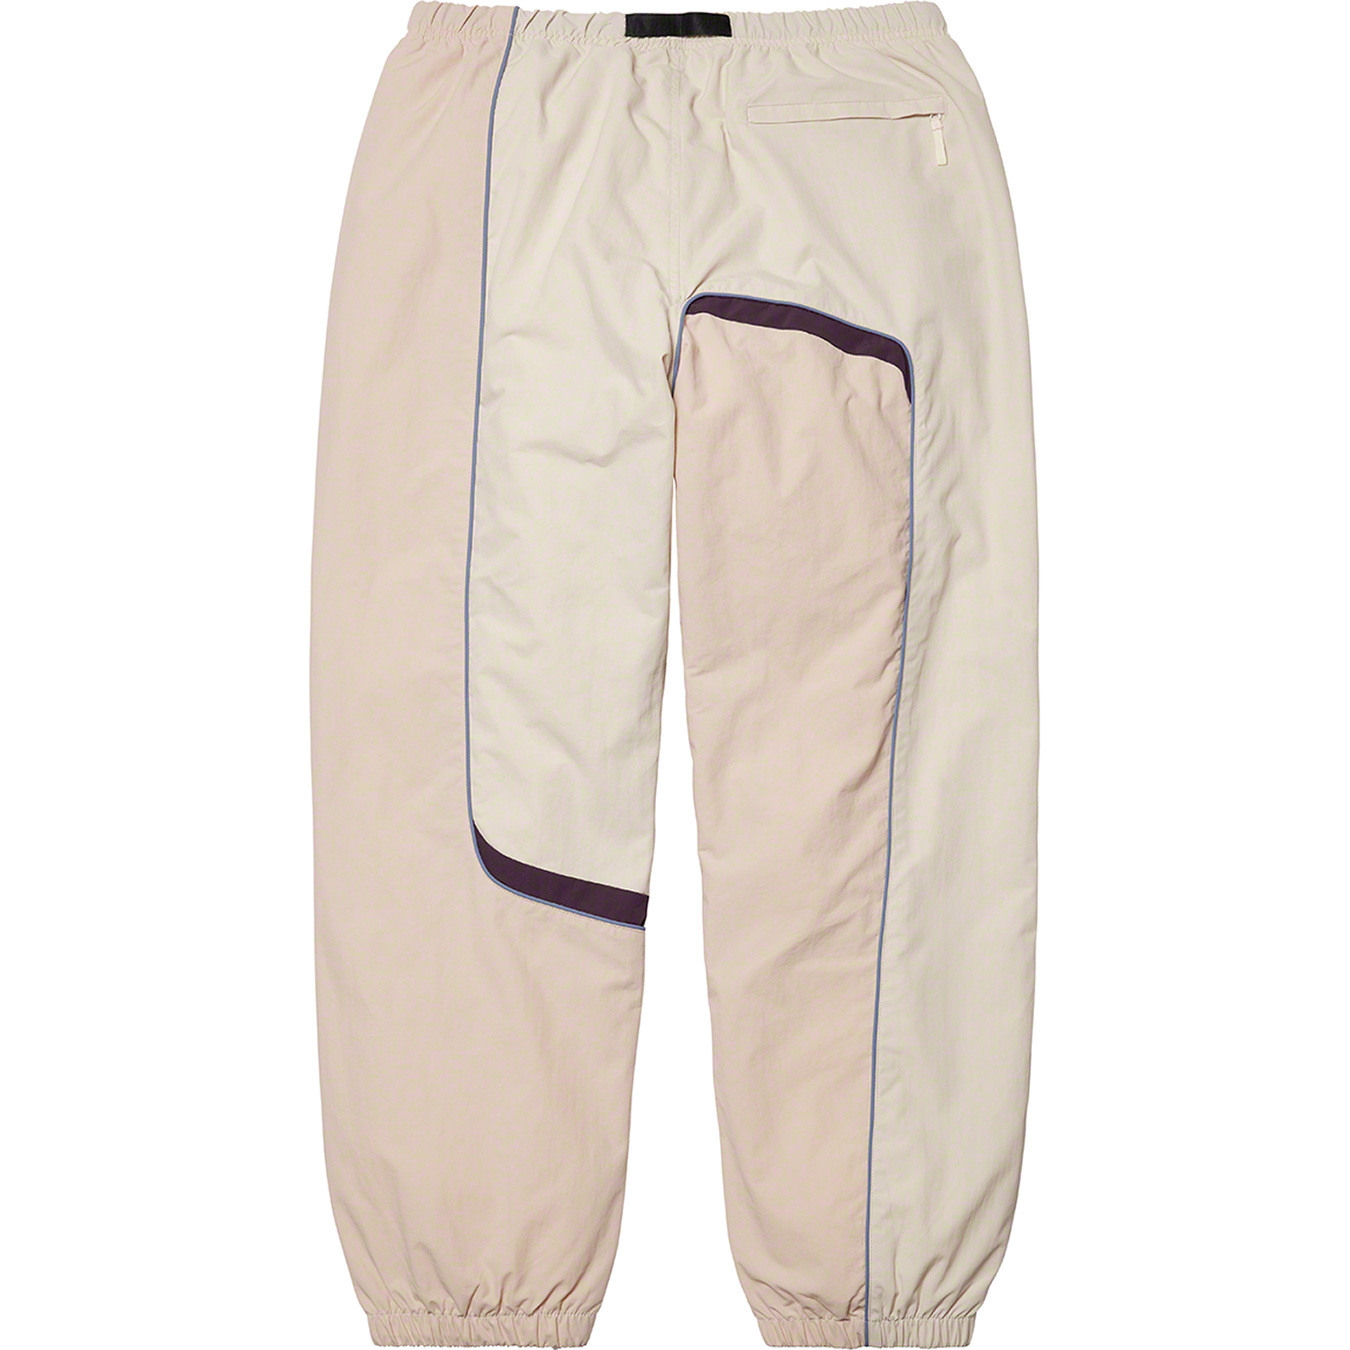 【Sサイズ 】 S Paneled Belted Track Pant